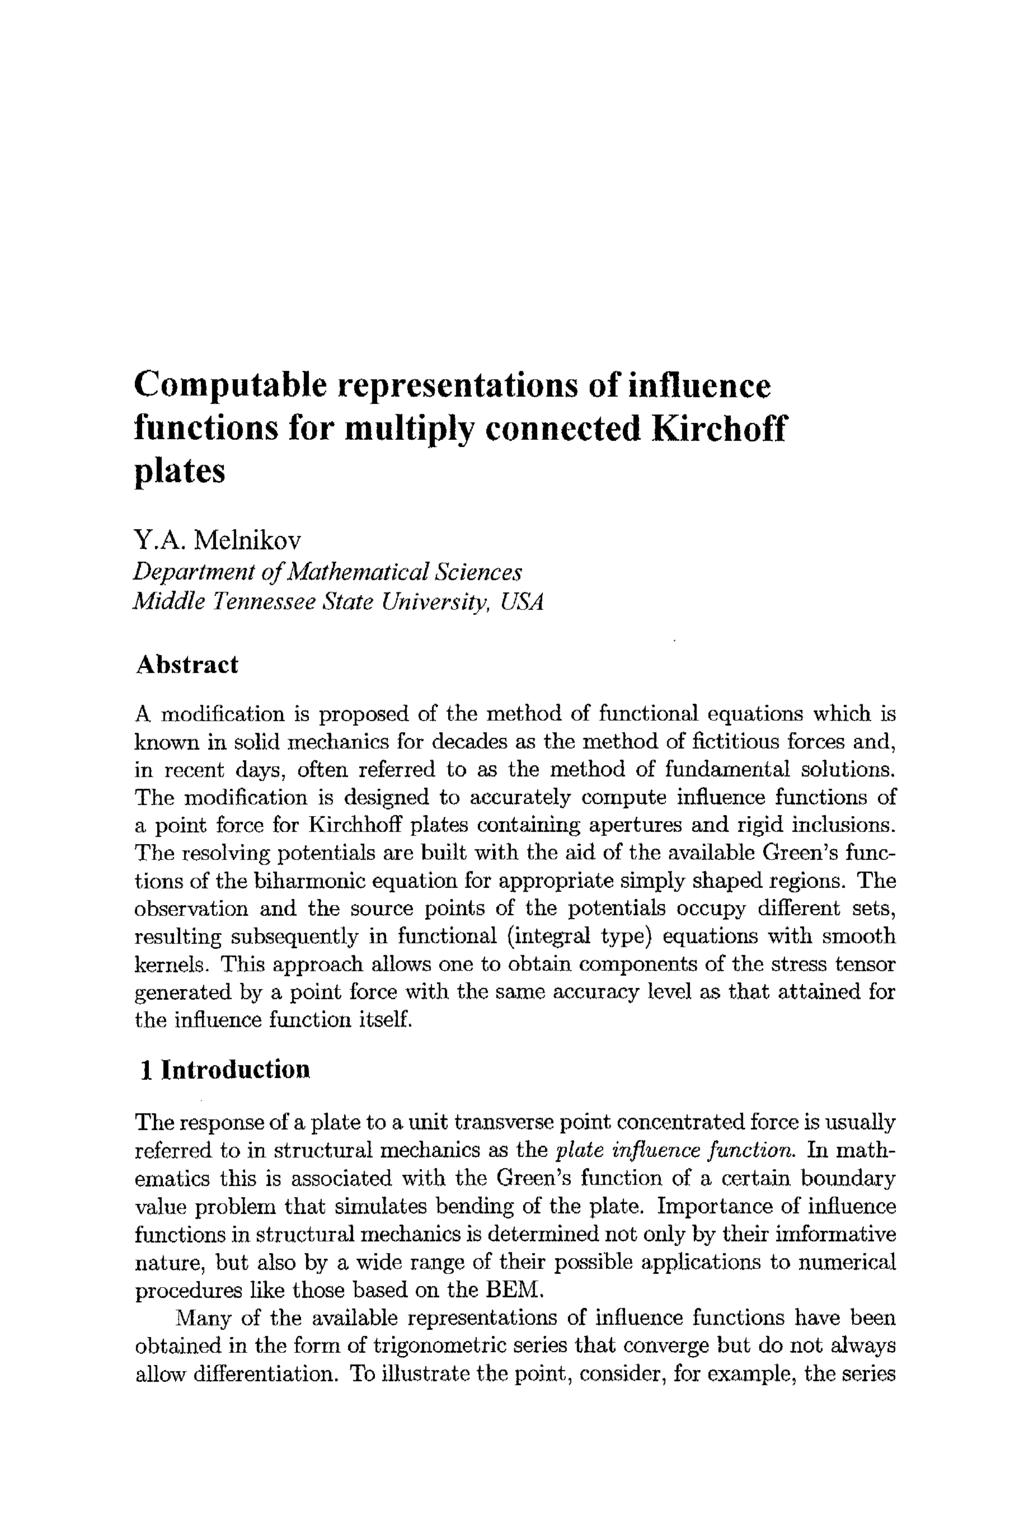 Computable representations of influence functions for multiply connected Kirchoff plates Y.A.